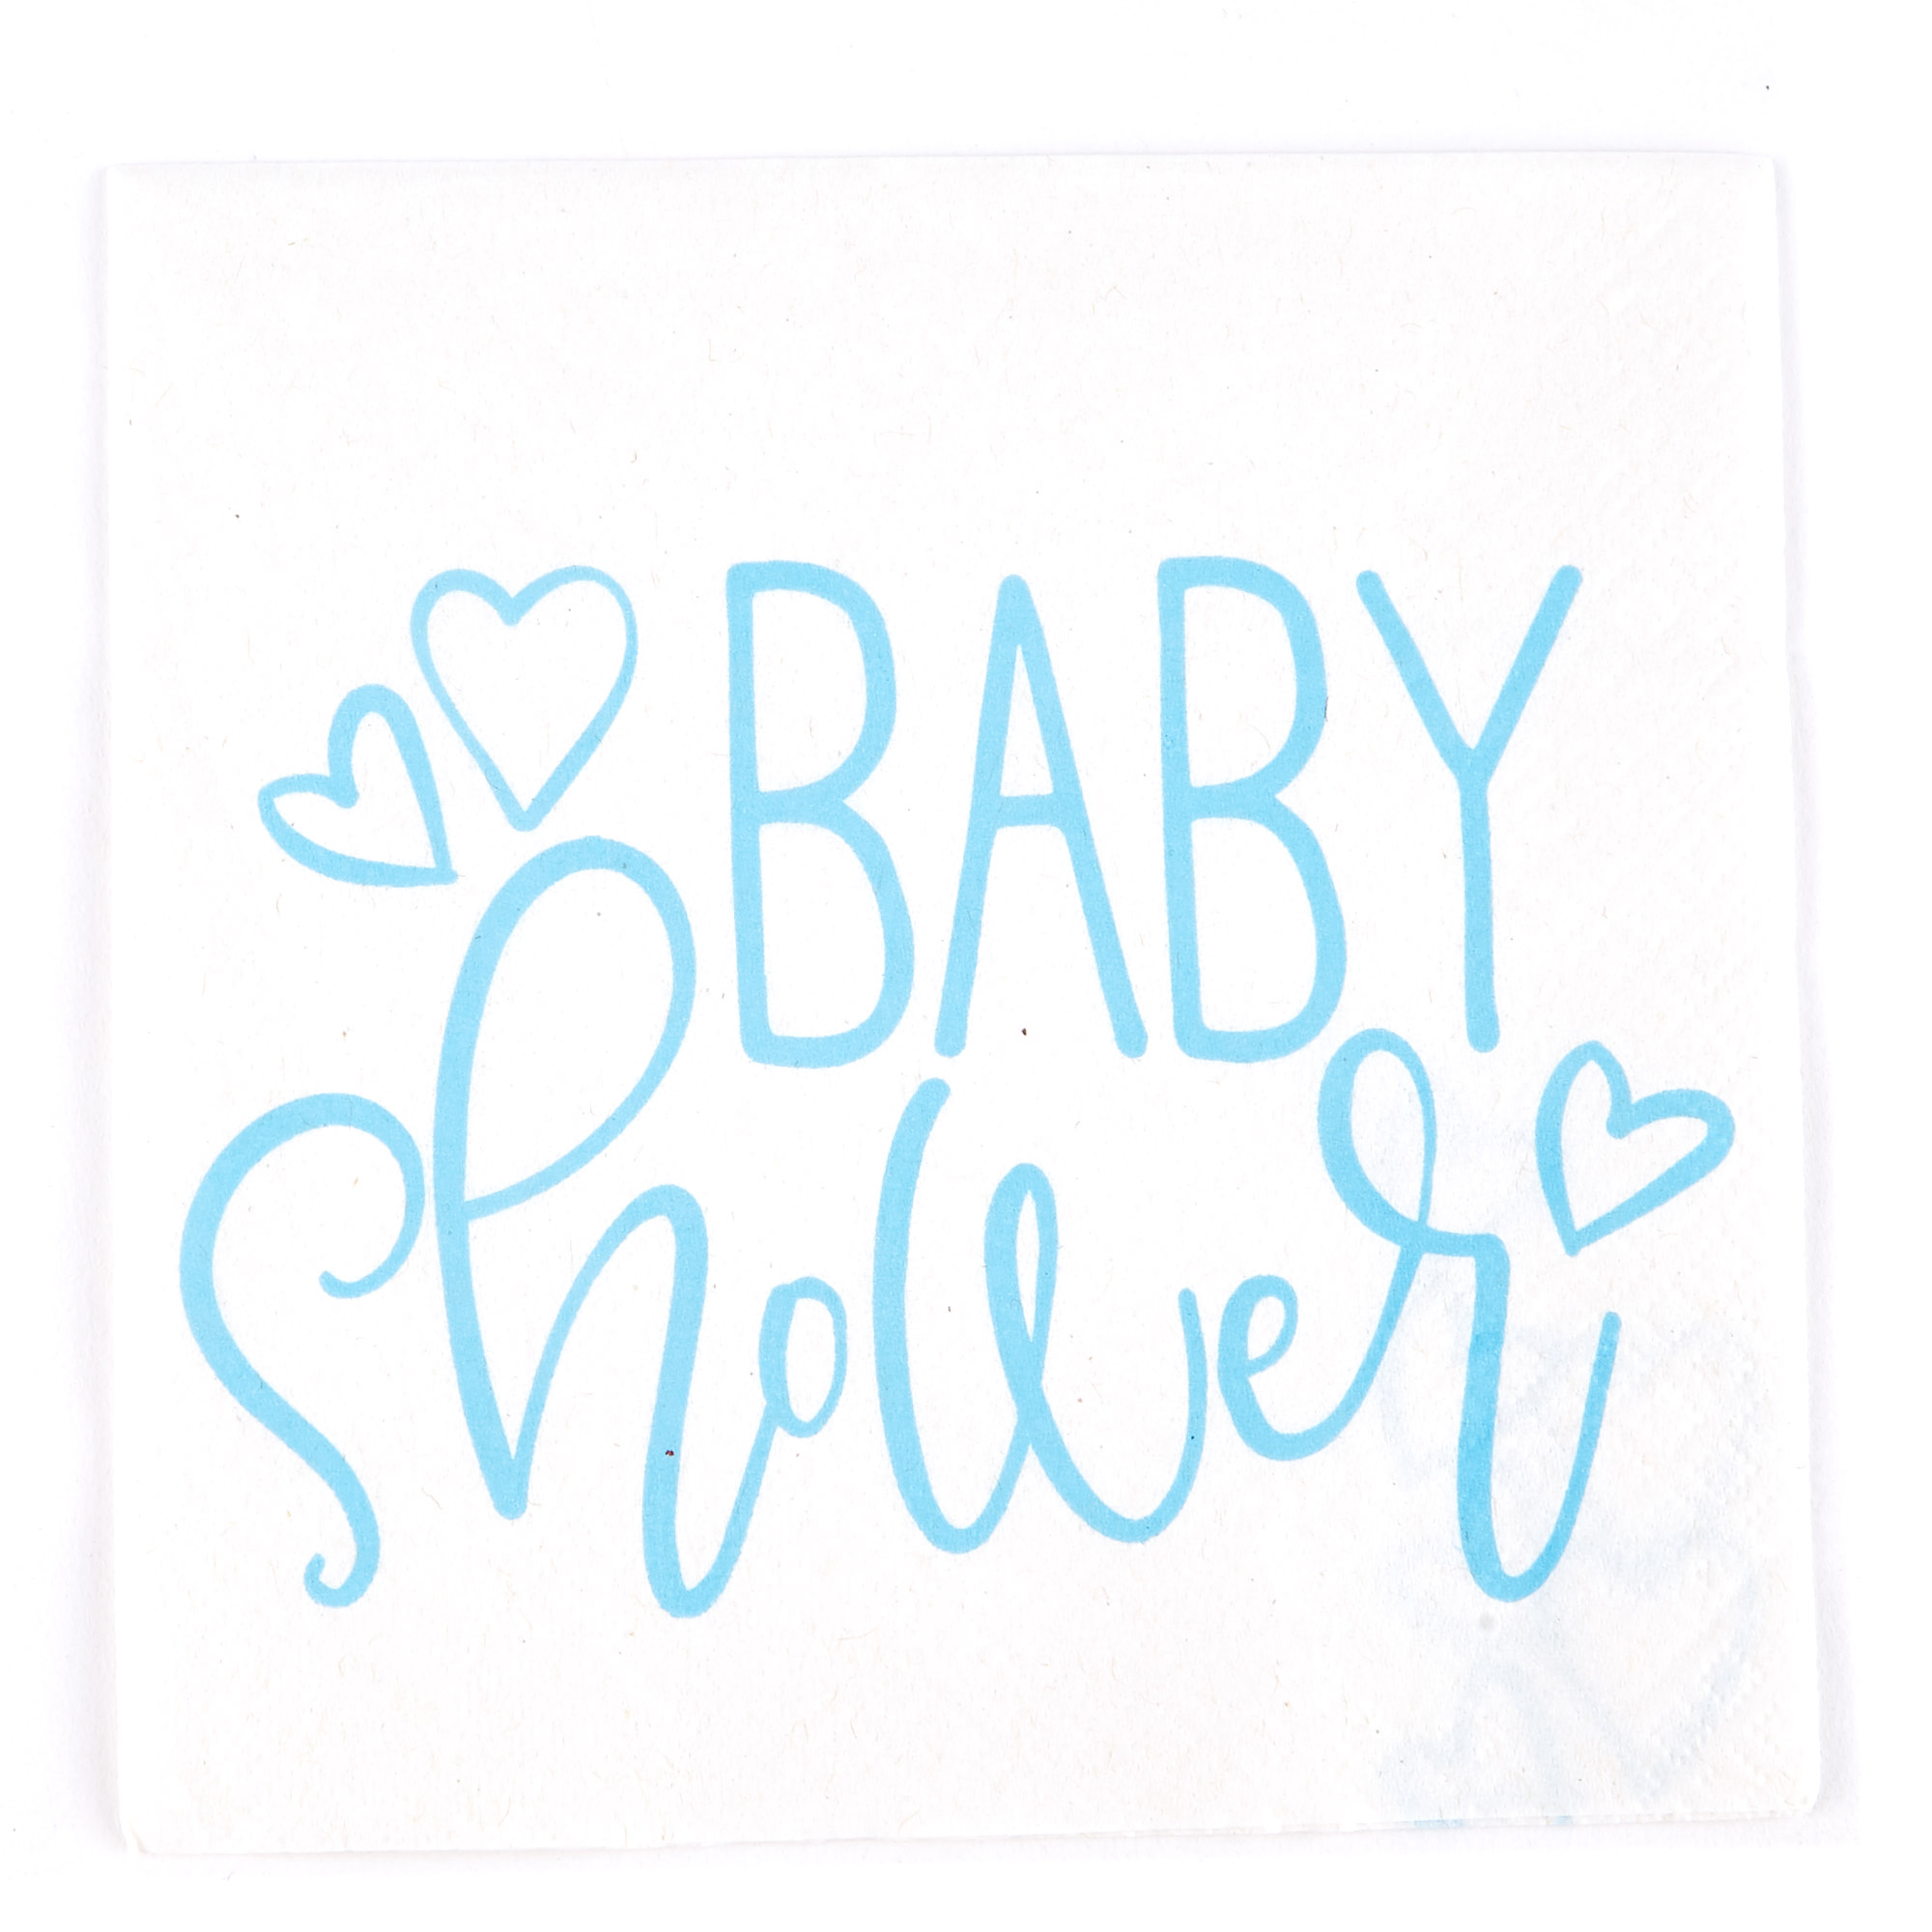 Blue Baby Shower Tableware & Decorations Party Bundle - 16 Guests